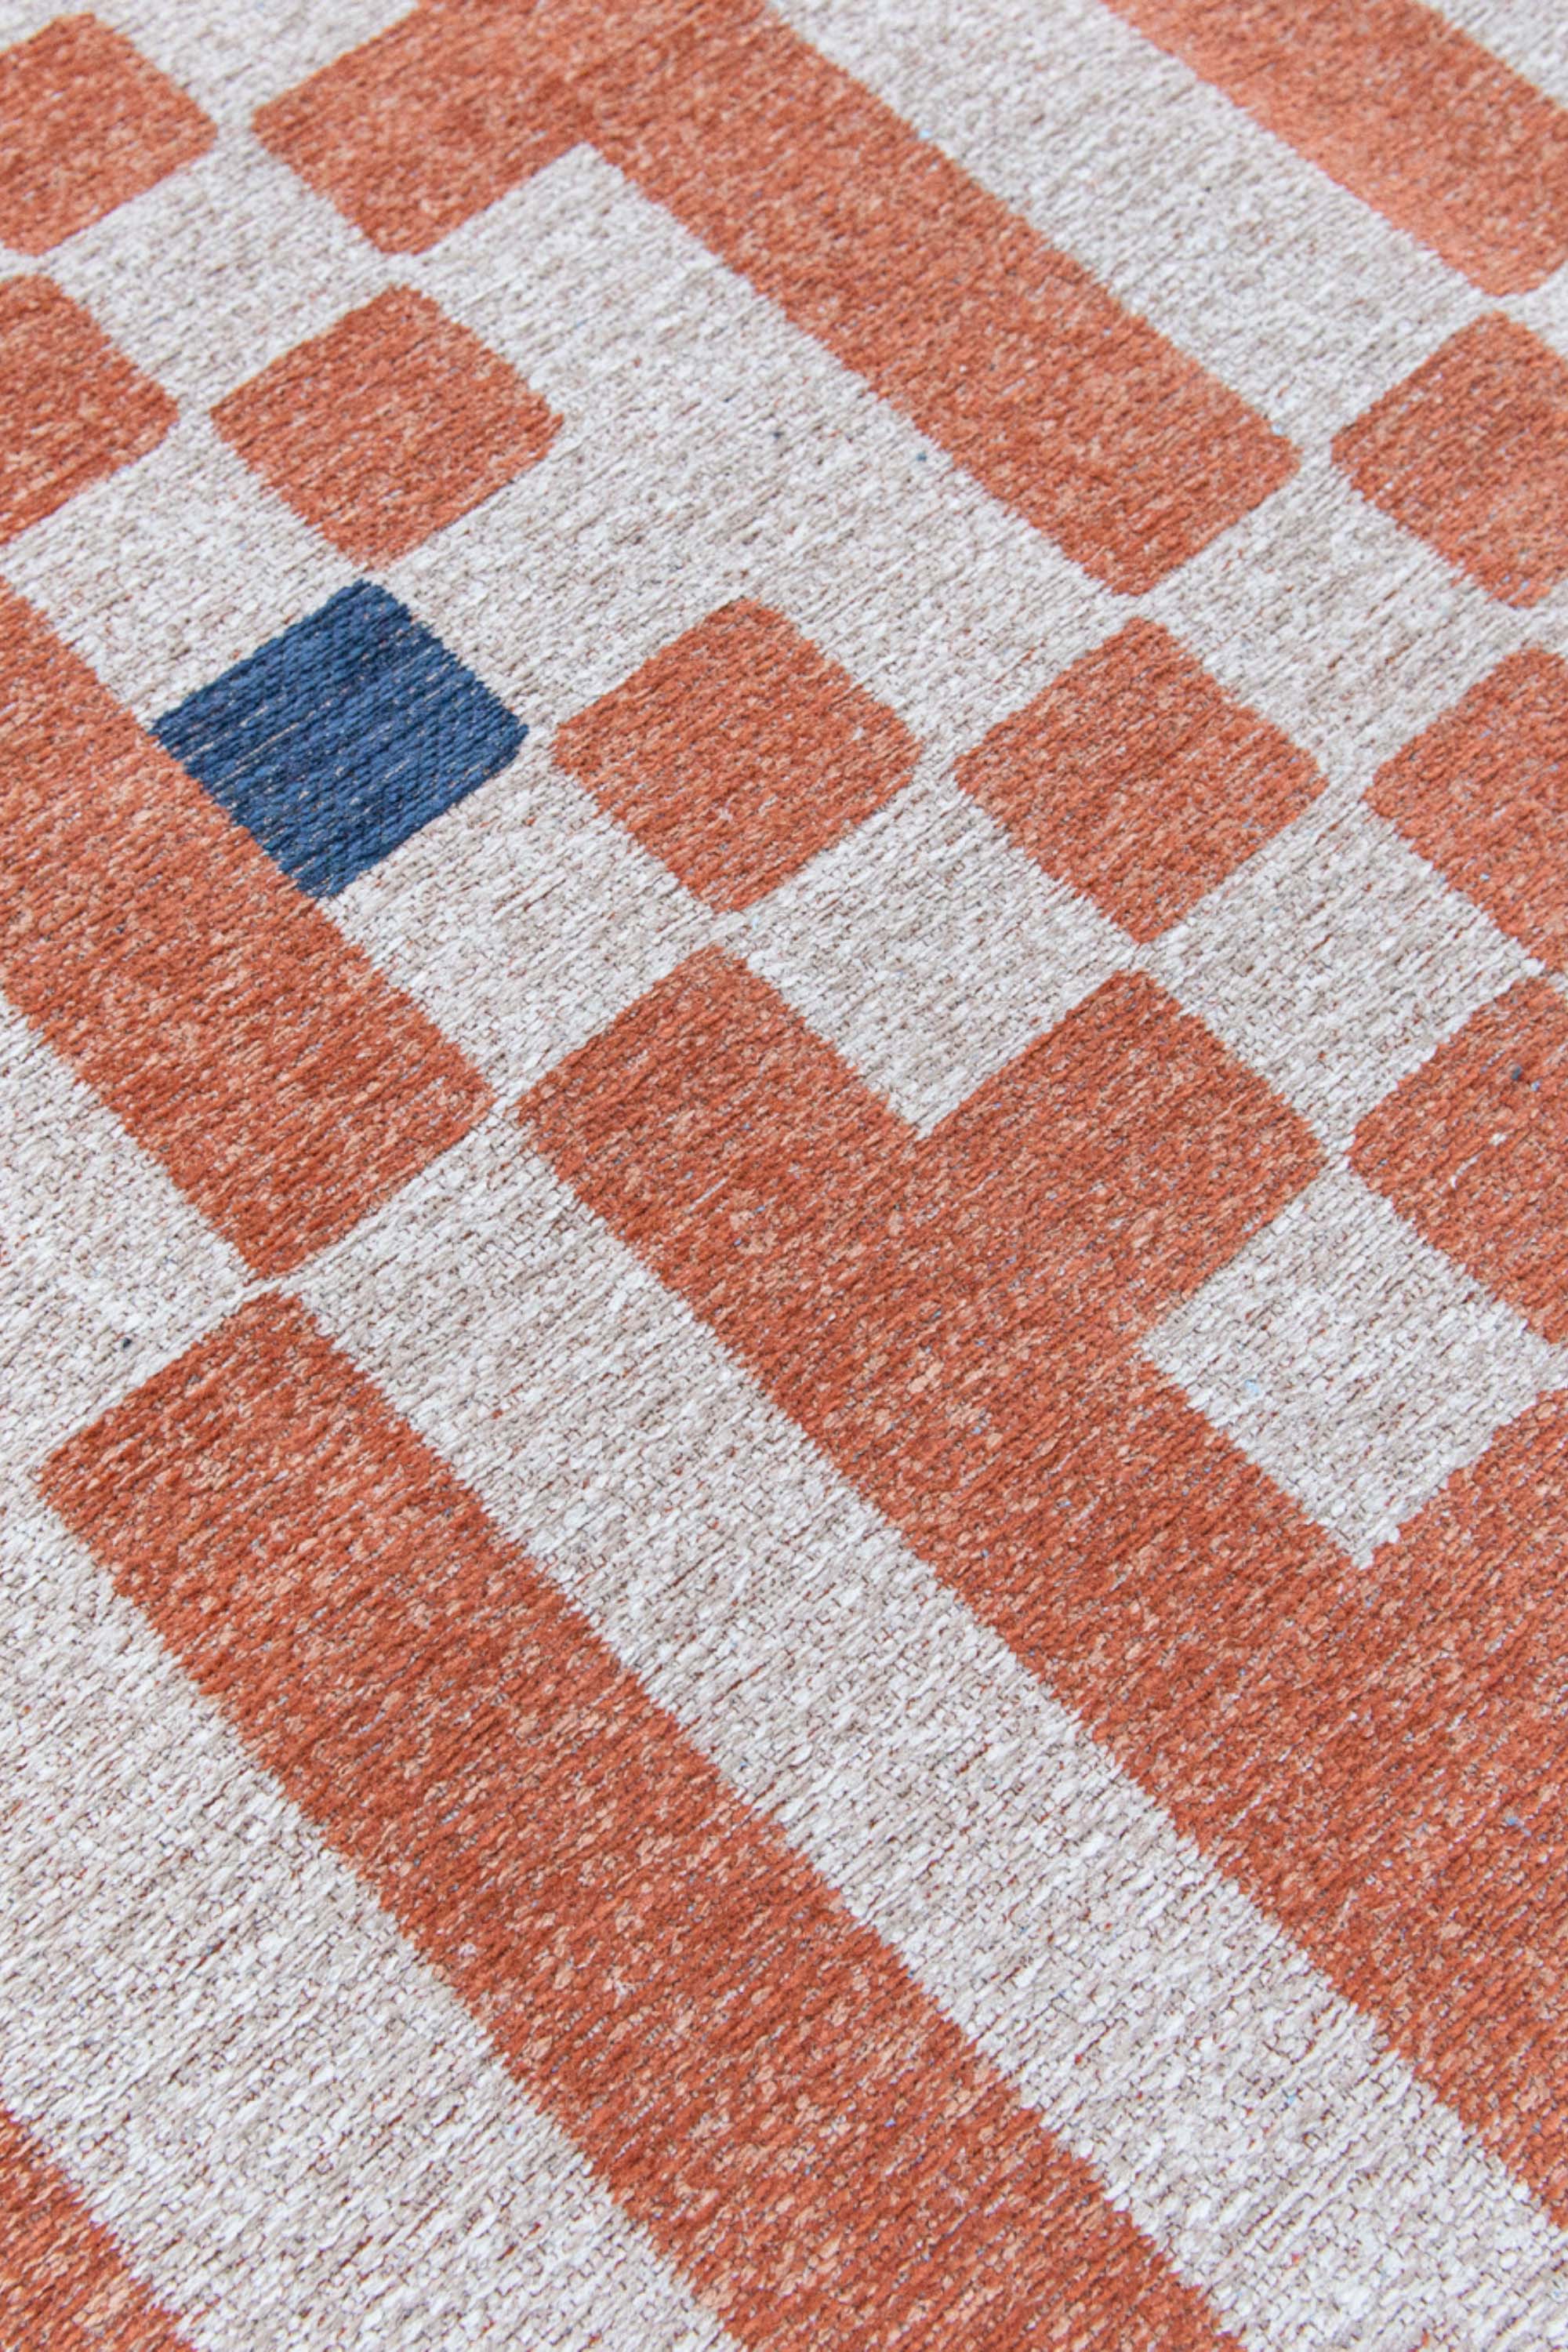 Abstract geometric rug with orange, blue, and white tones